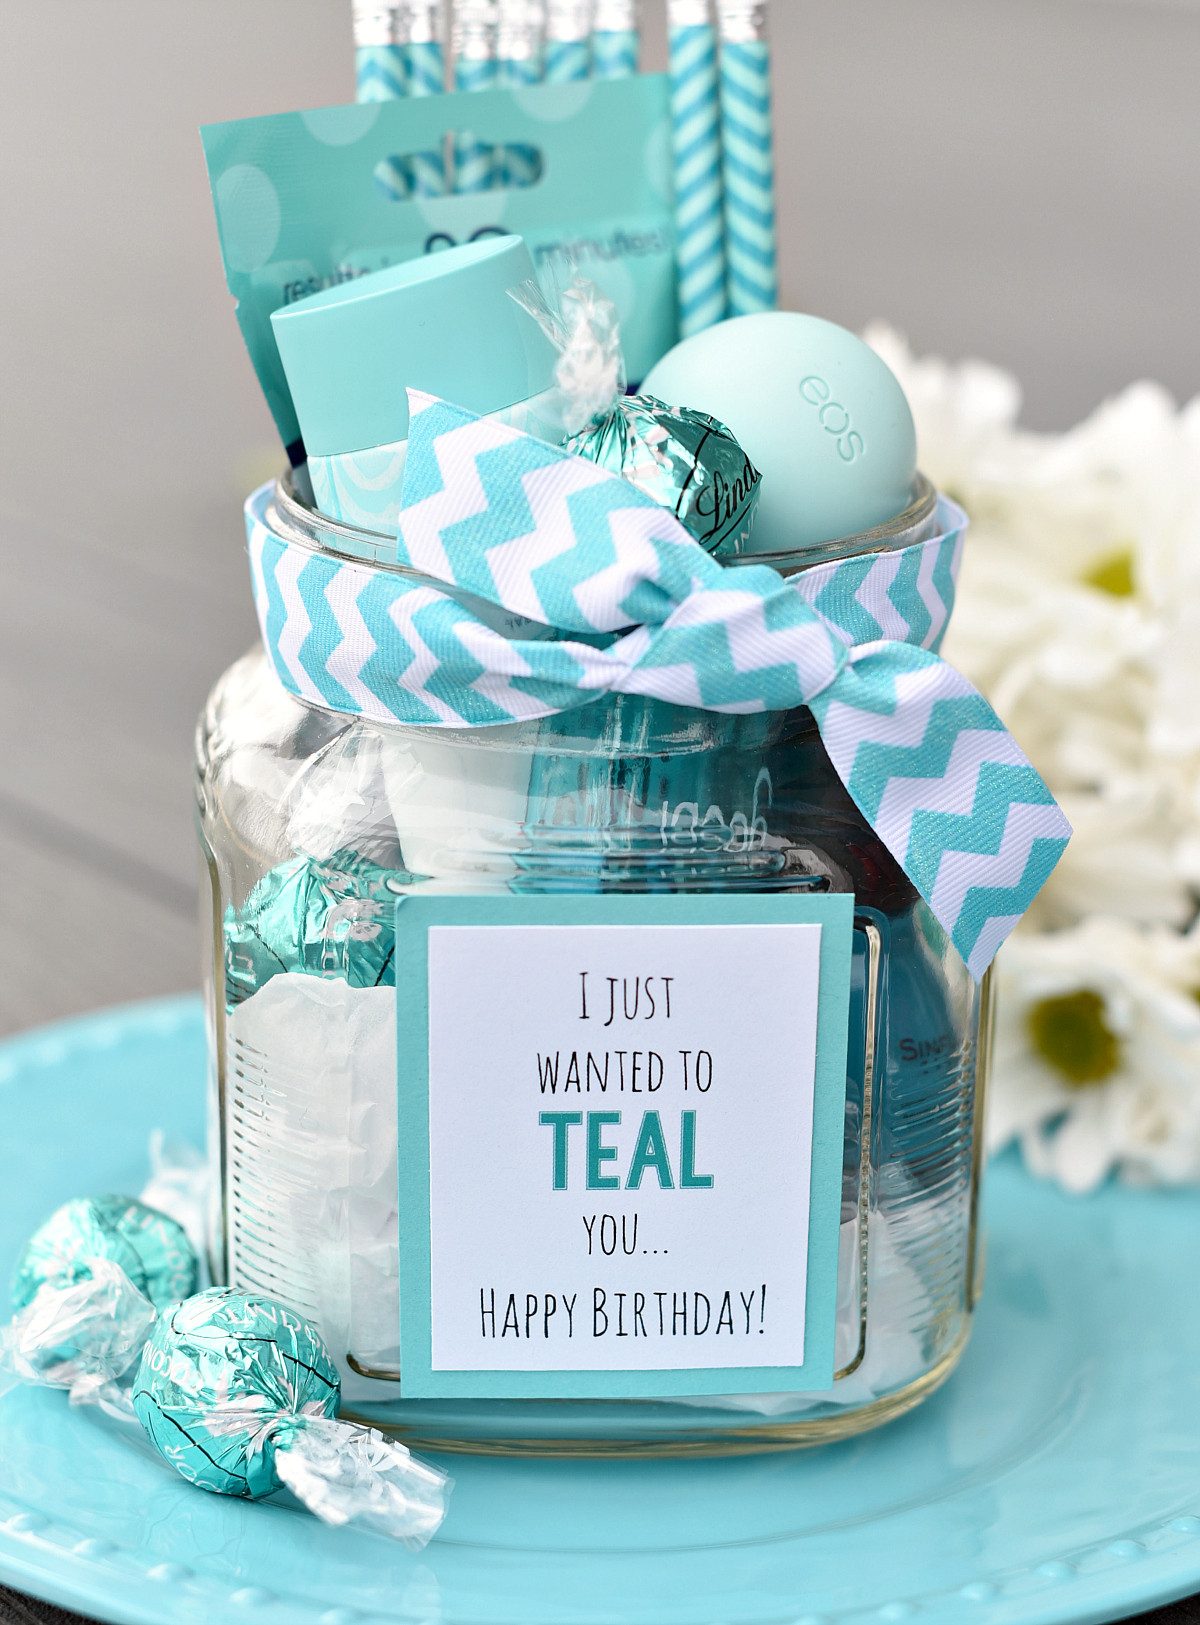 Best Birthday Gifts For Women
 Teal Birthday Gift Idea for Friends – Fun Squared